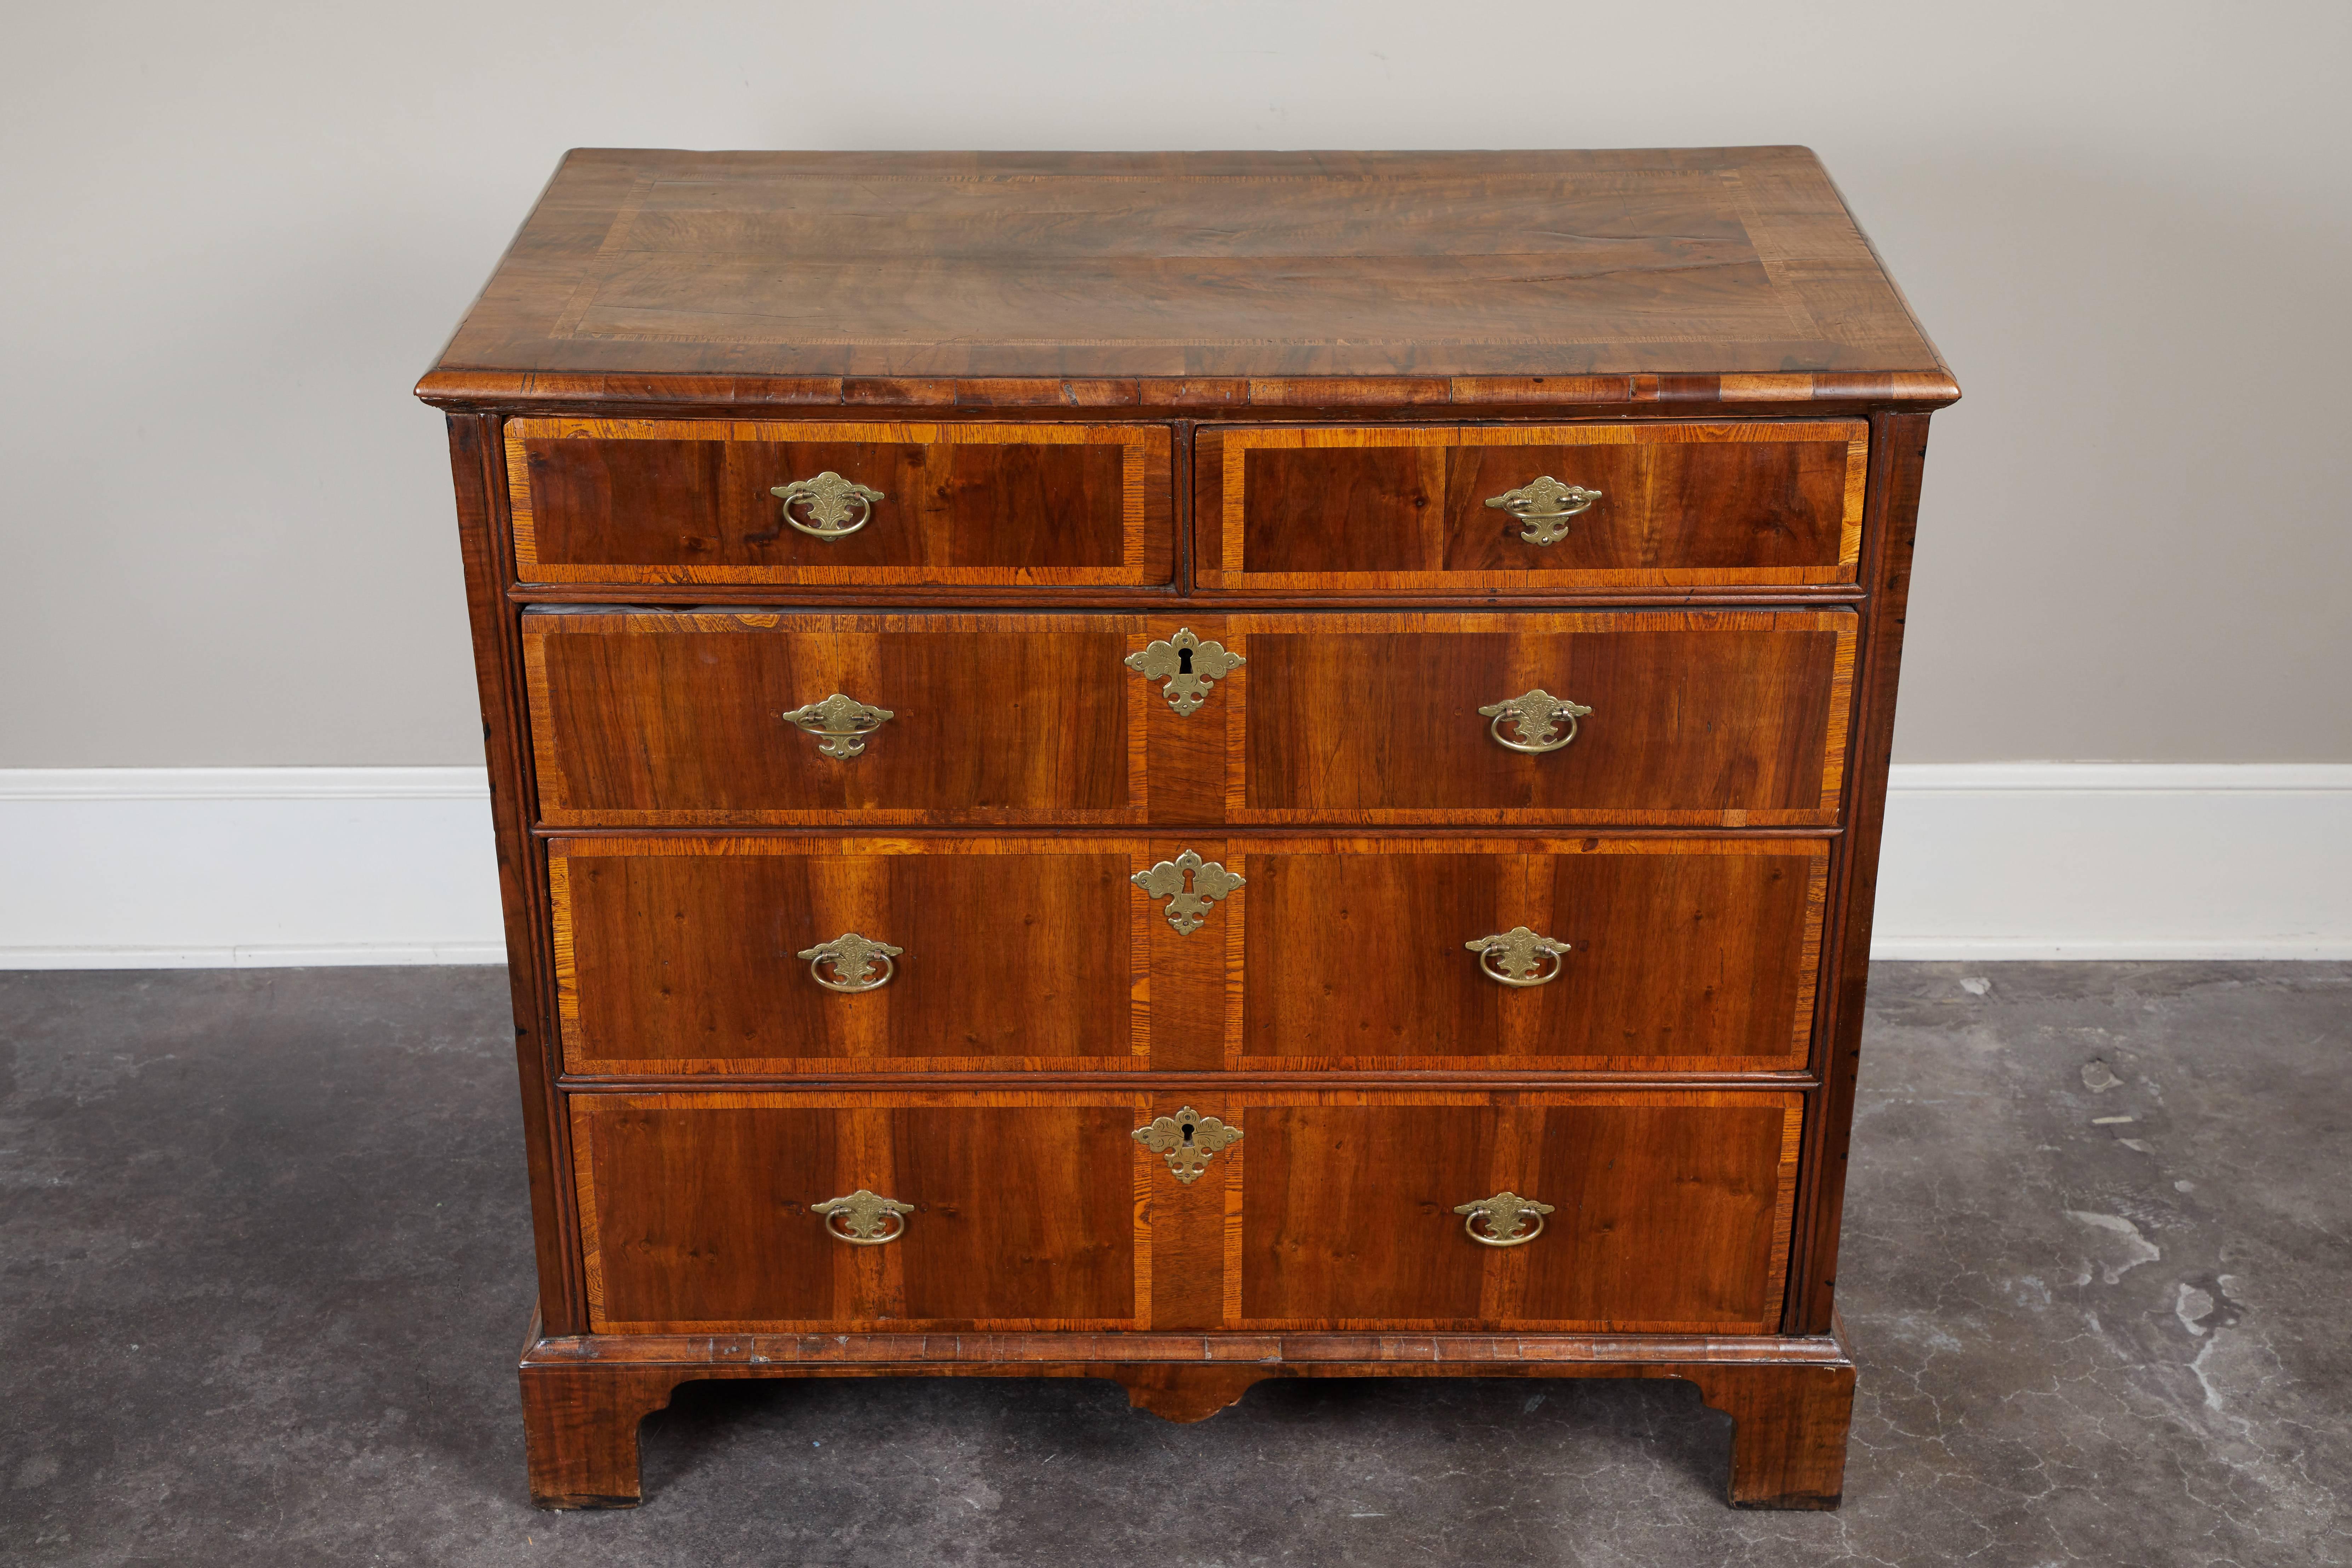 An 18th century George I English walnut chest of drawers. Inlay detailing on the top and face of each of five drawers.